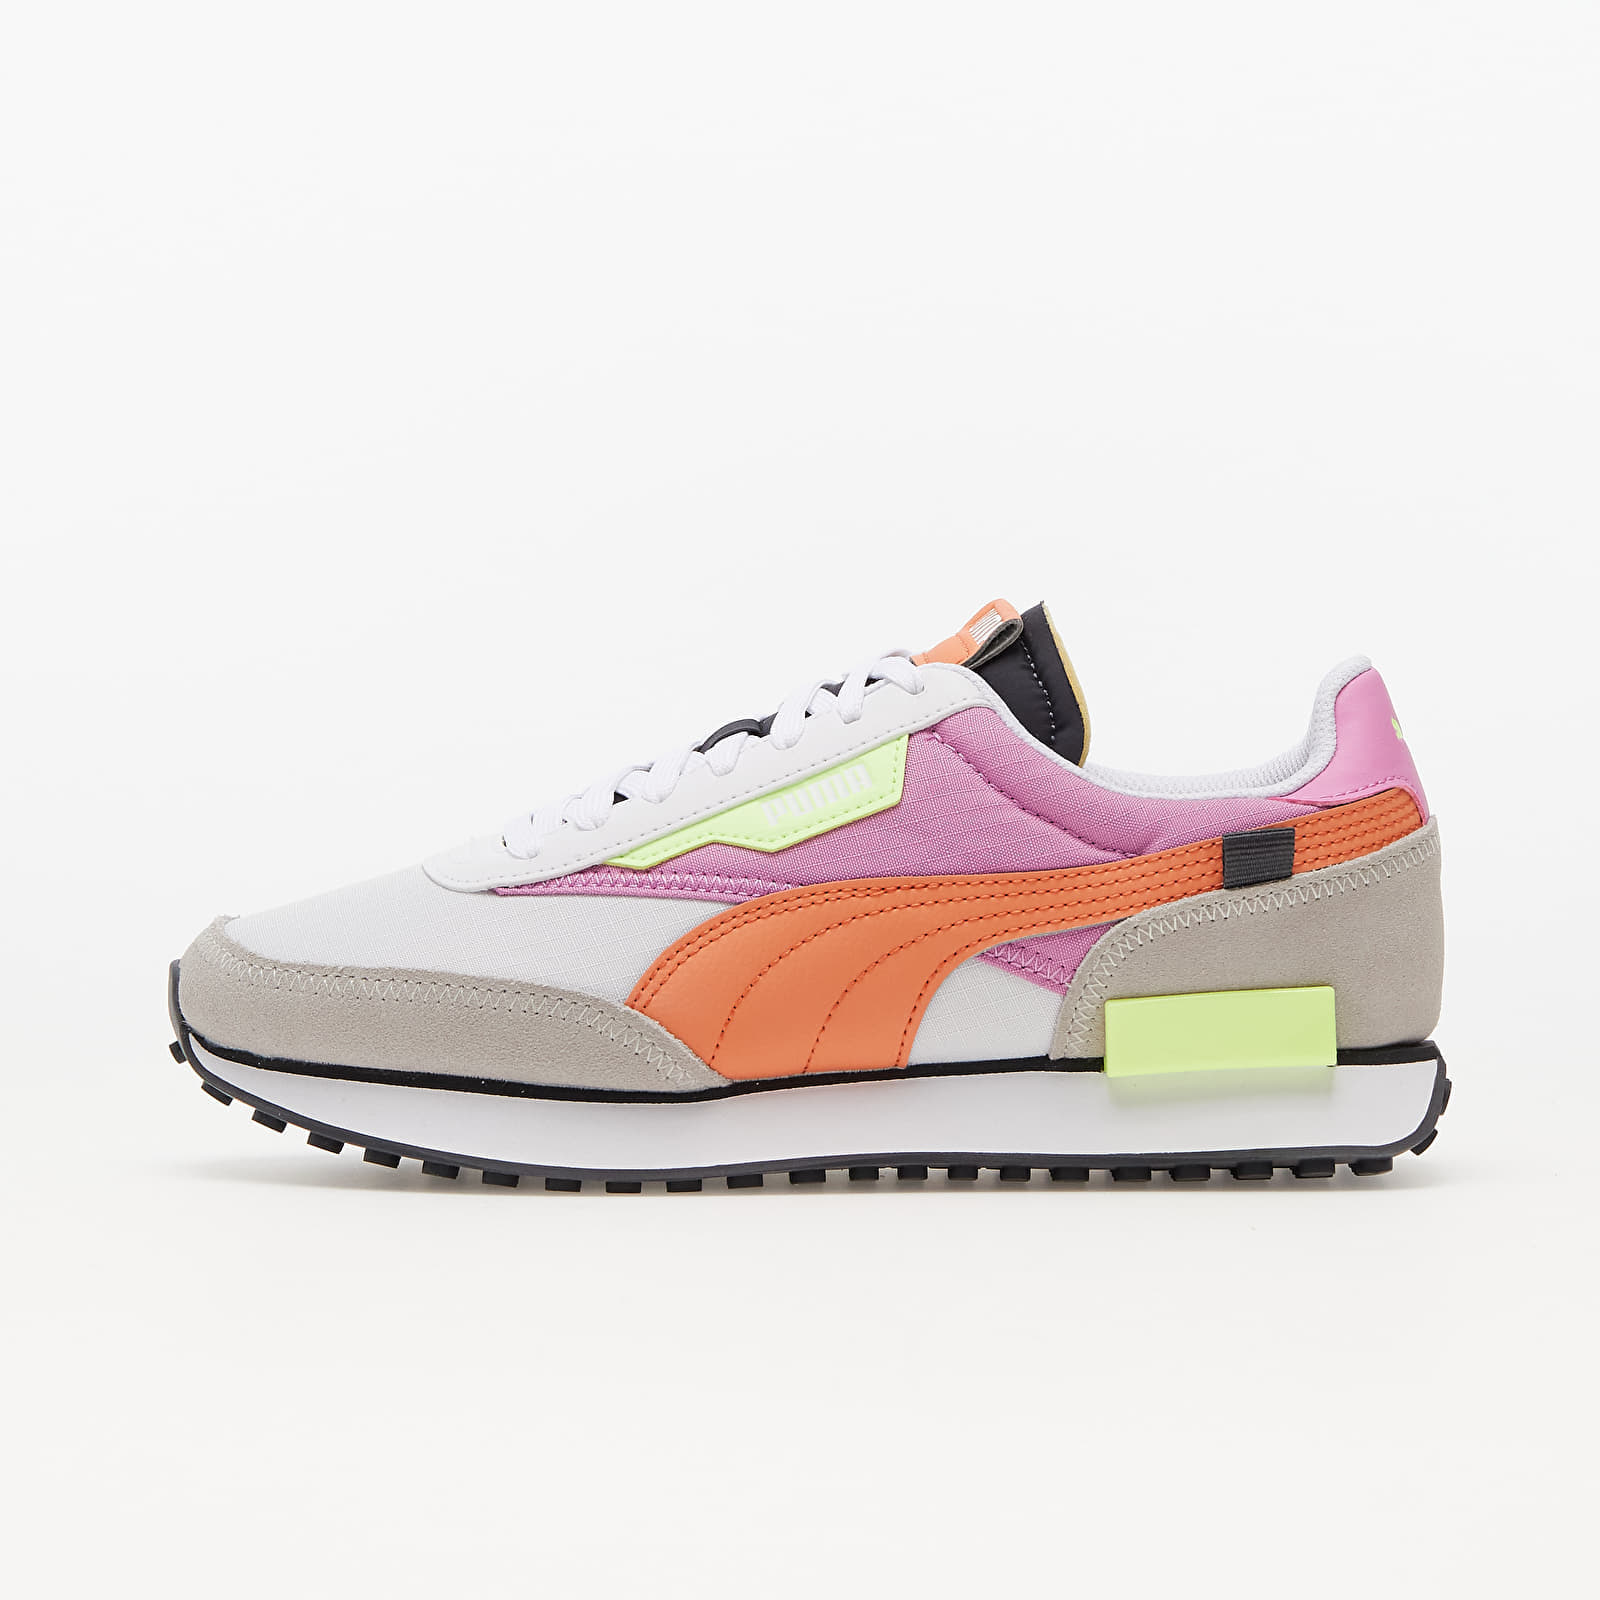 Men's sneakers and shoes Puma Future Rider Play On Opera Mauve/ Deep Apricot/ Gray Violet